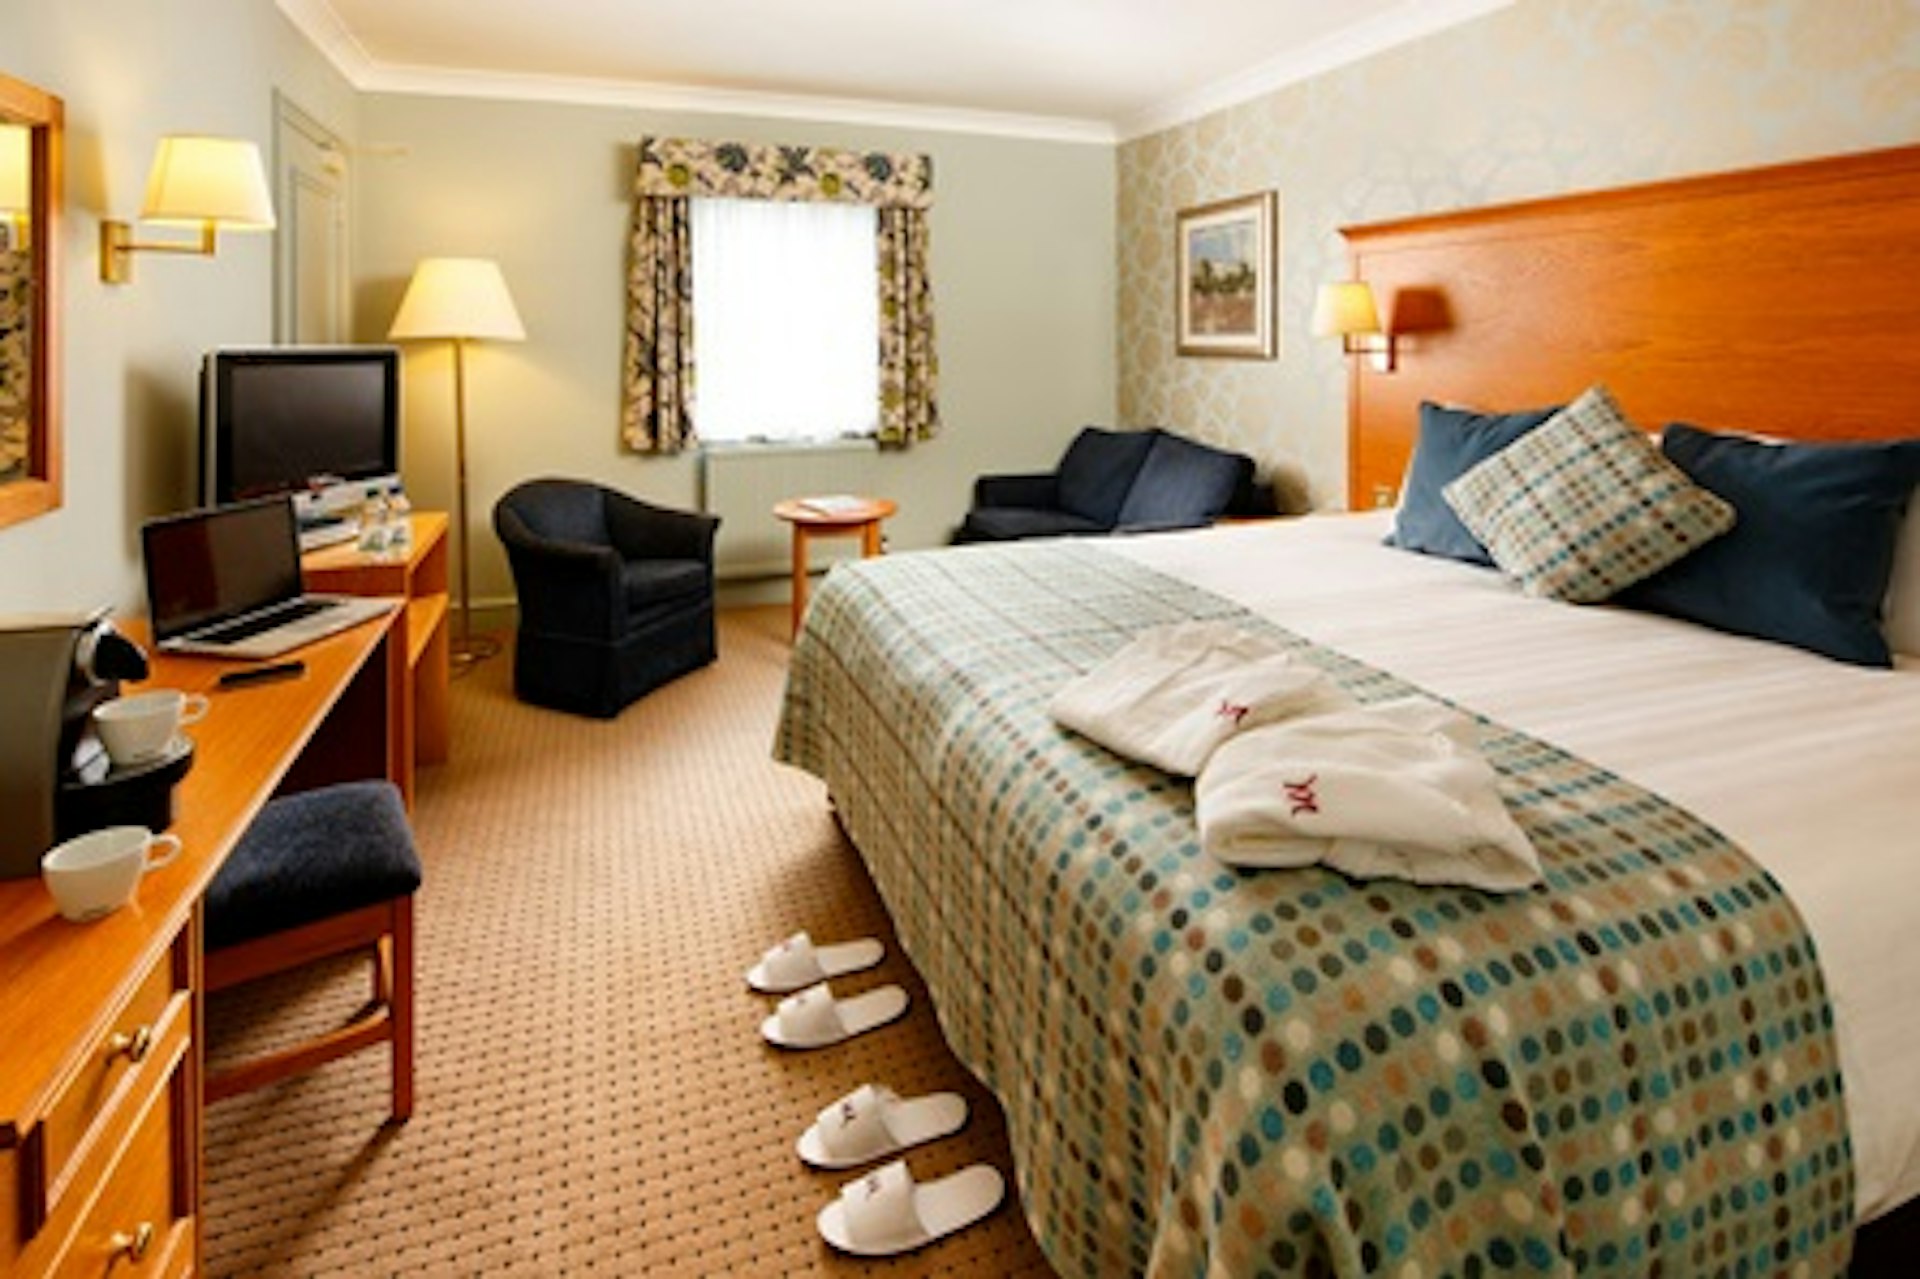 One Night Break for Two at The Grange Hotel, Bristol North 2